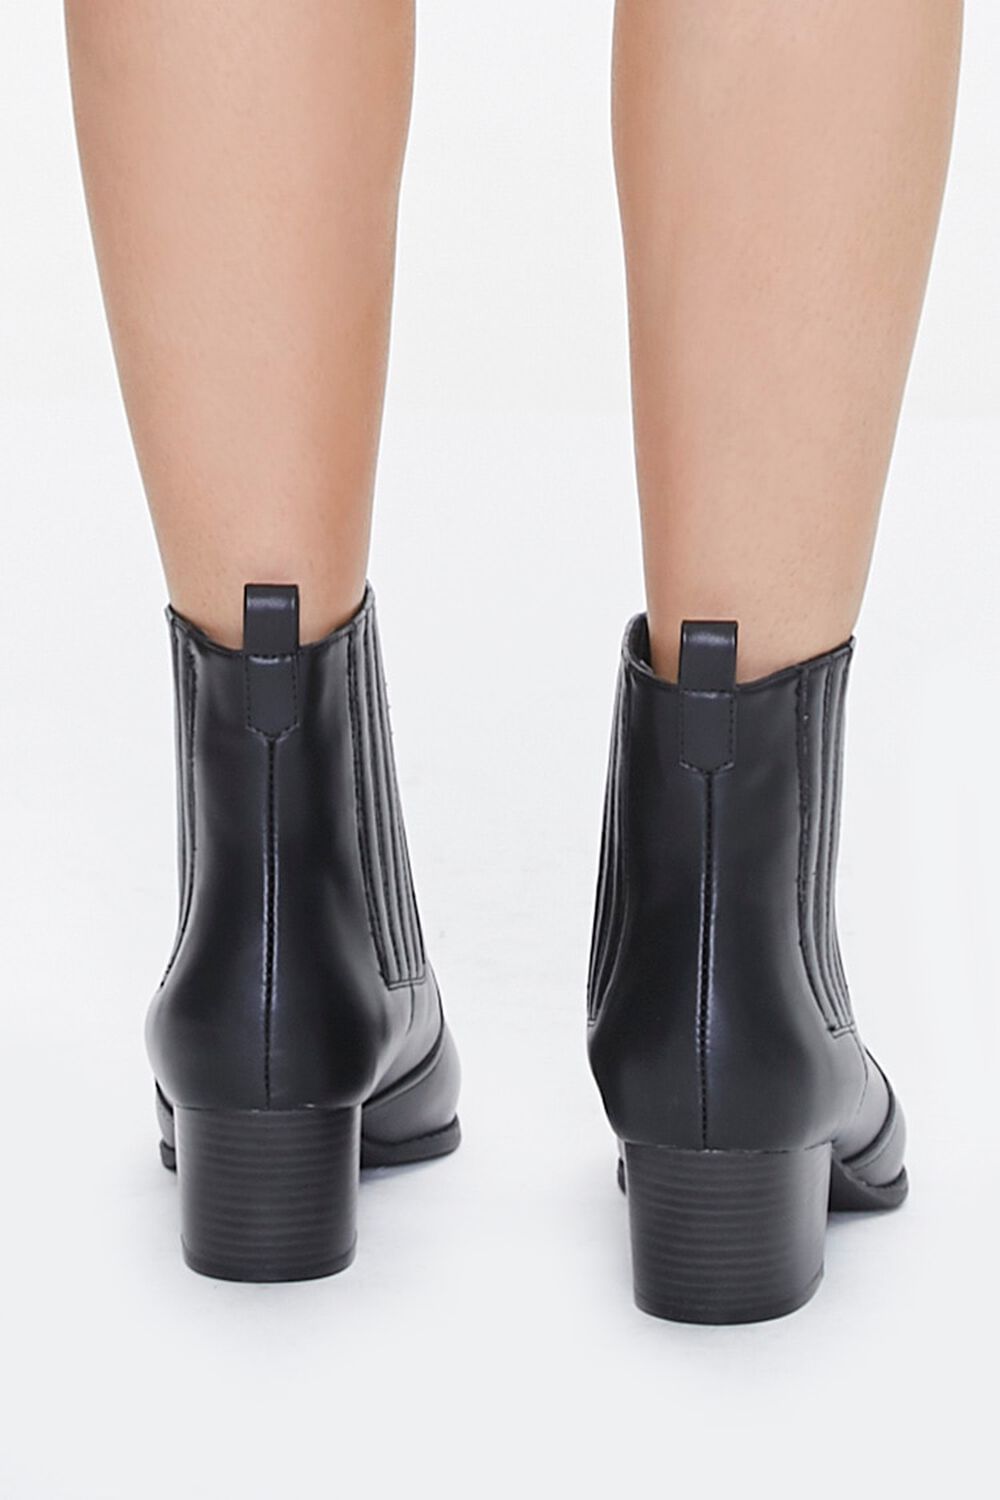 Faux Leather Pointed Toe Booties, image 3